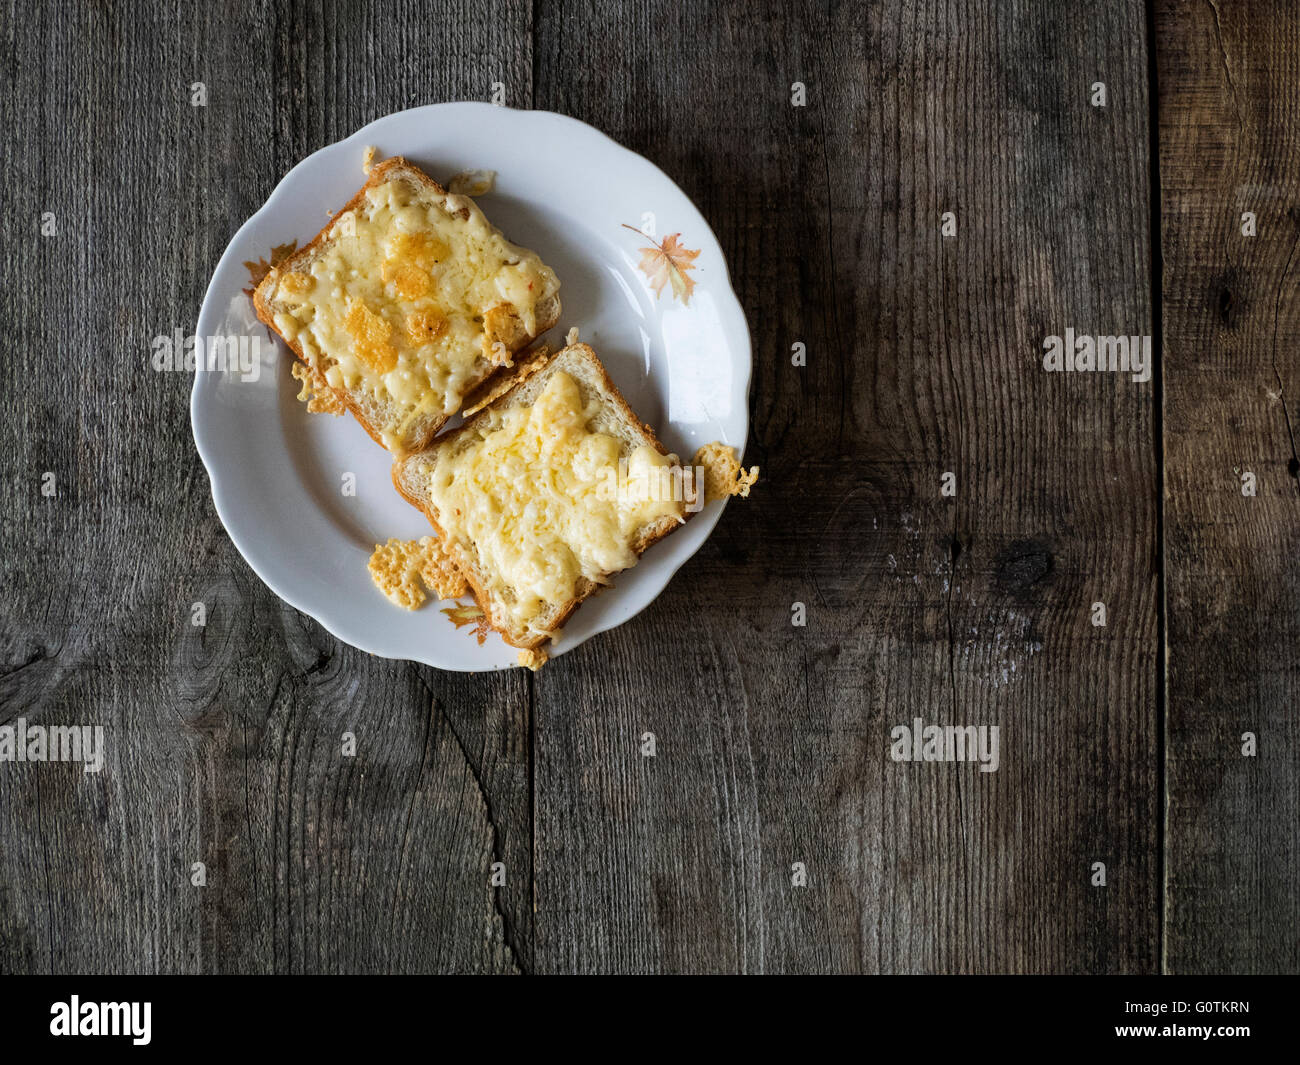 Toast with melted cheese on plate Stock Photo